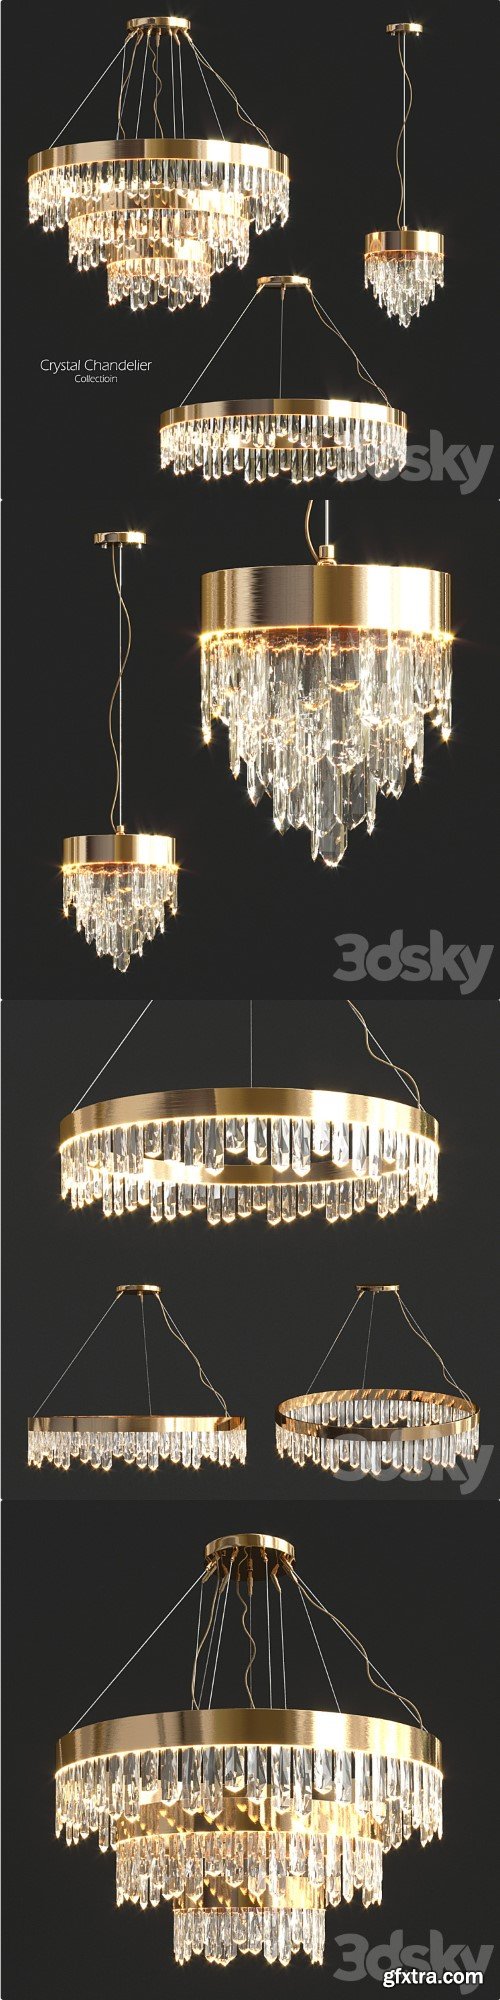 Crystal chandelier collectioin